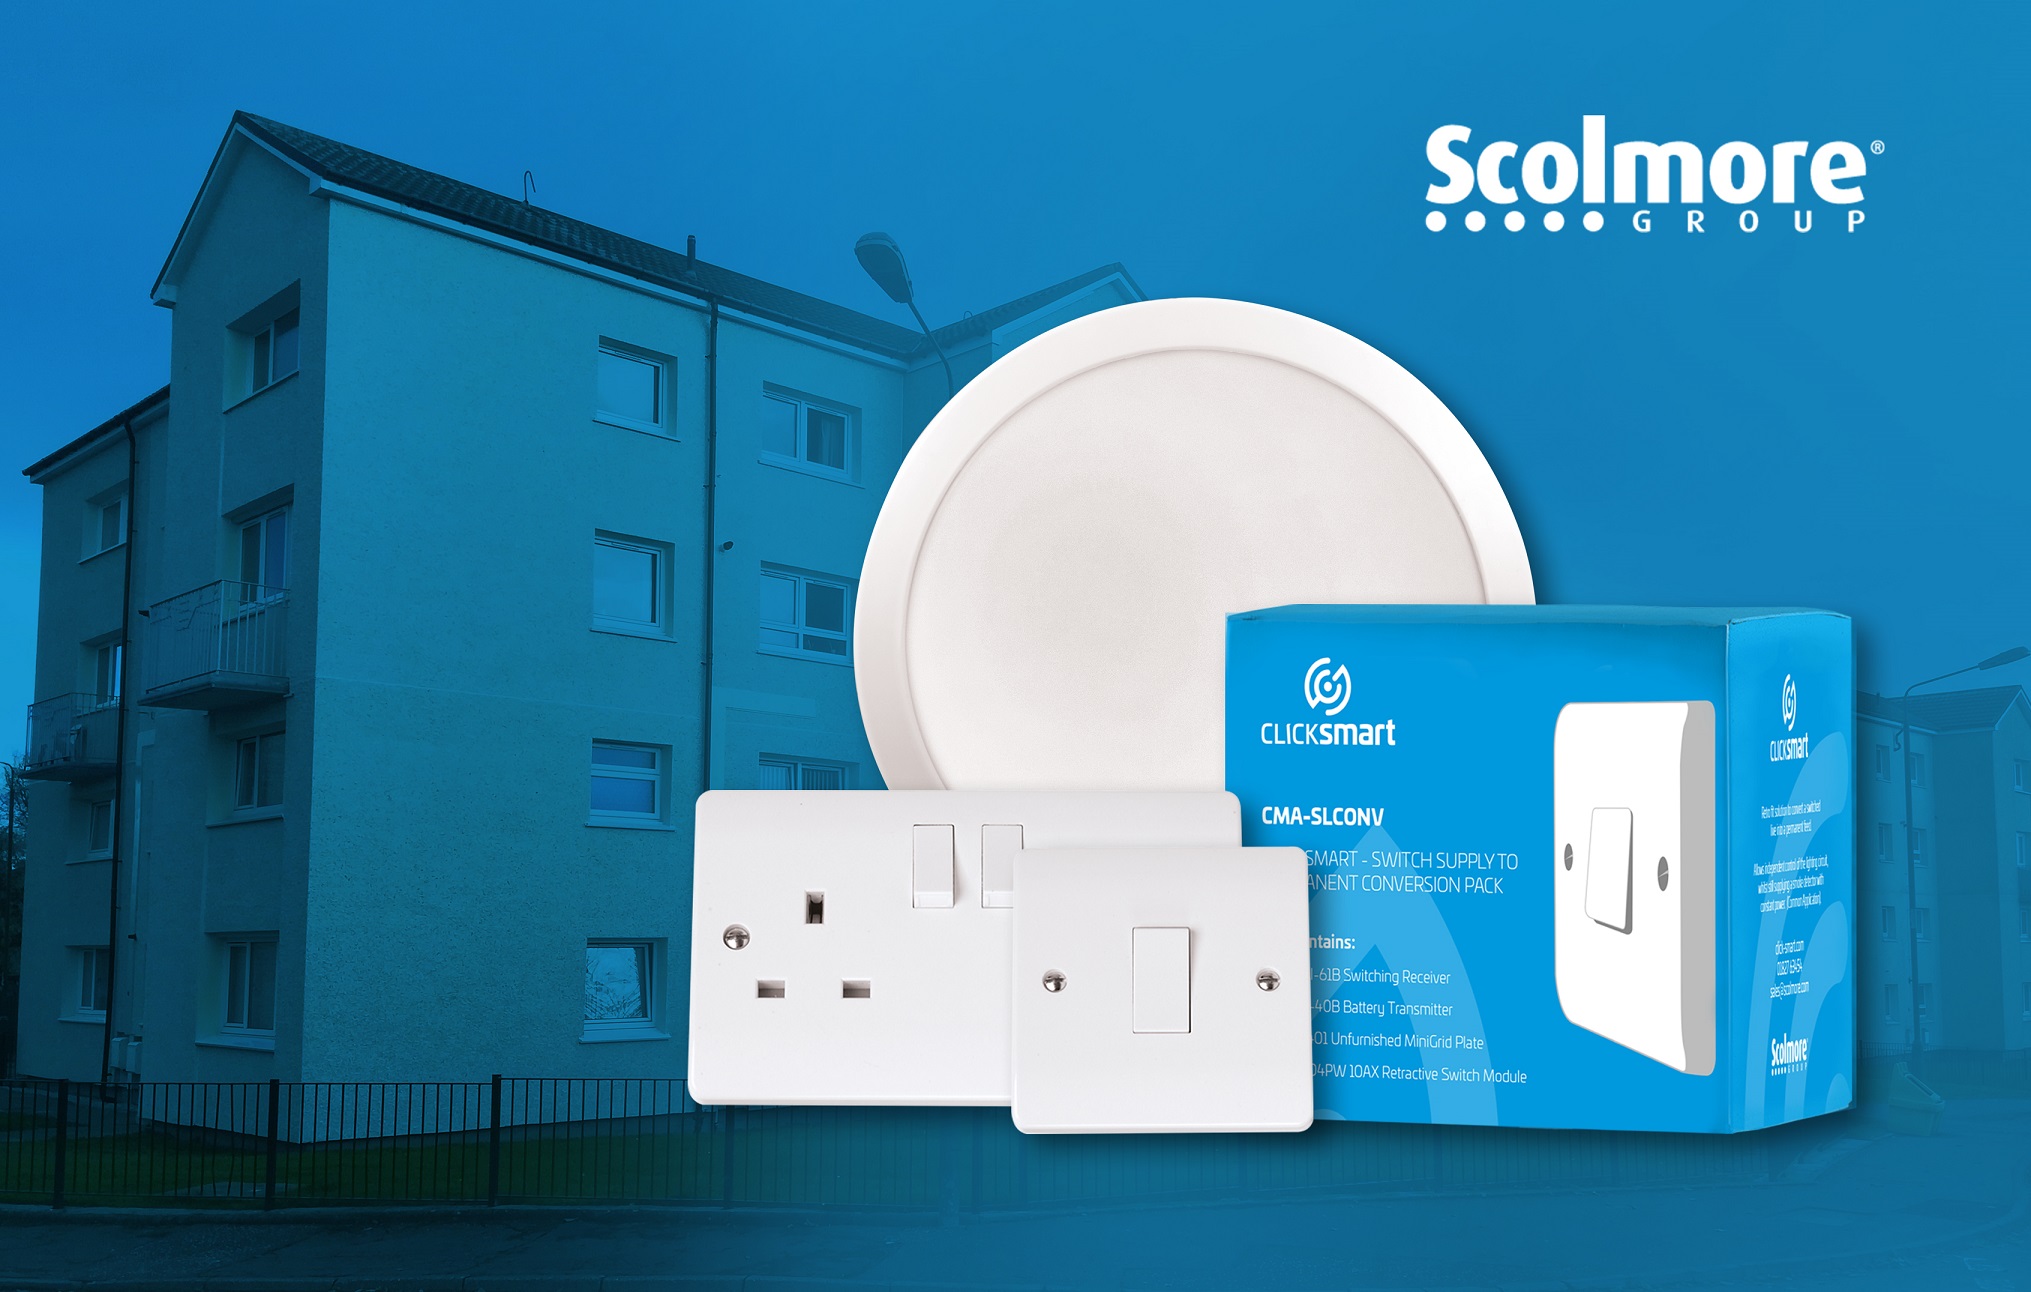 Stirling Council makes Scolmore its one-stop-solution